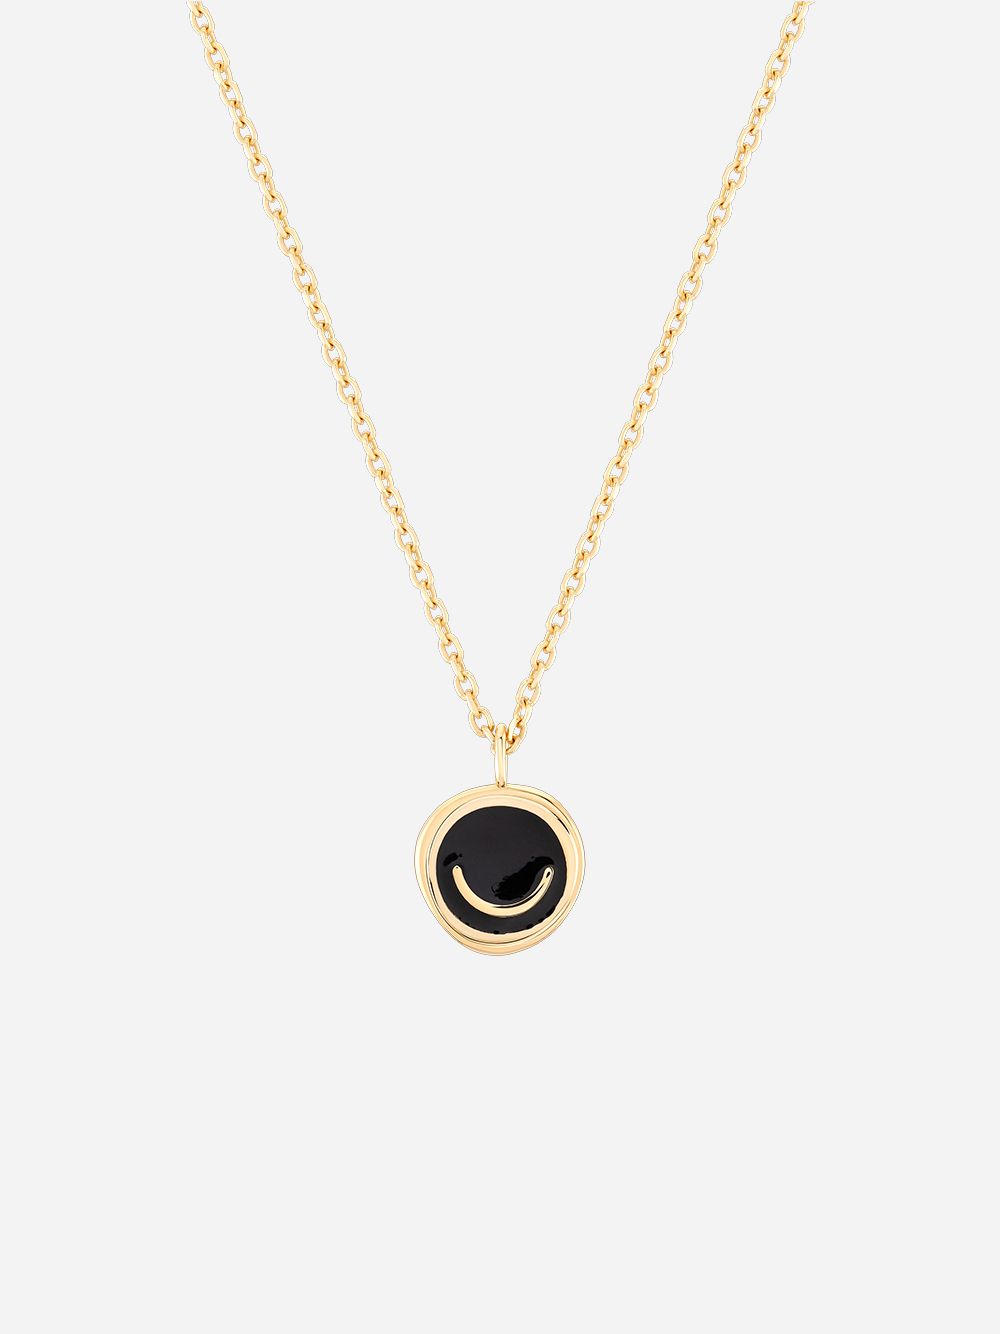 Happiness Necklace | Wonther